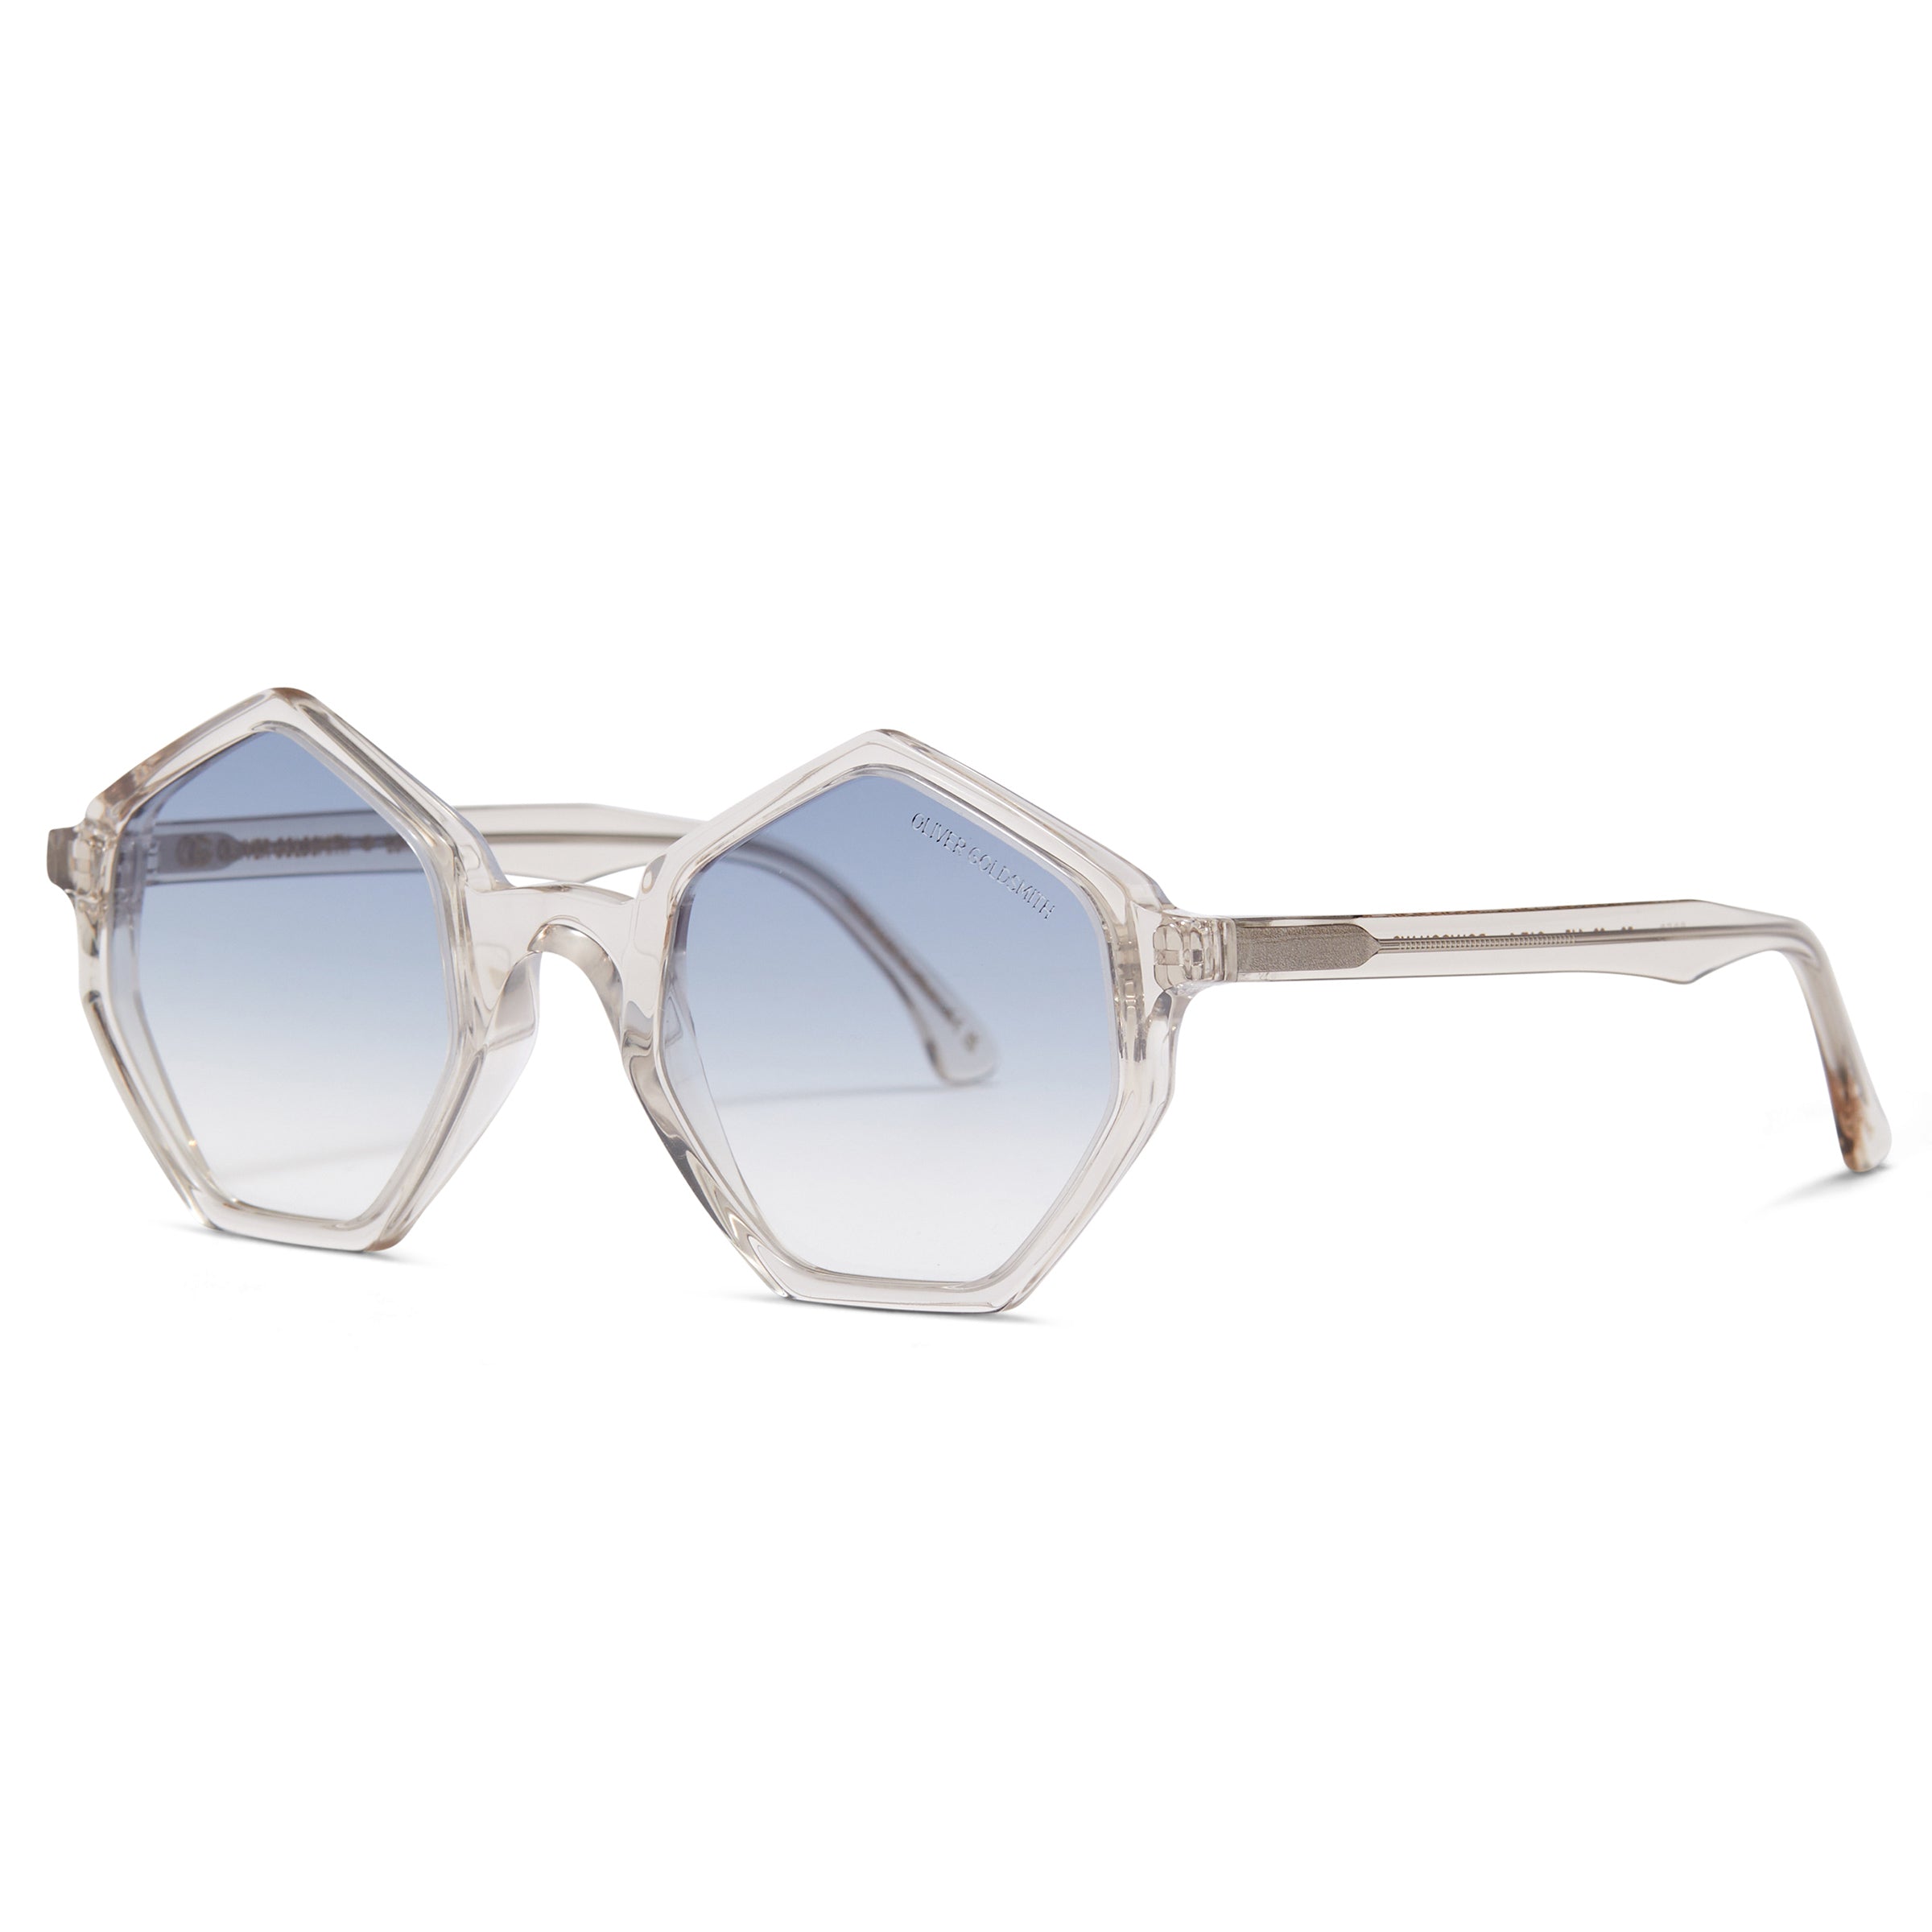 Side view of Transparent Framed Hexagon Sunglasses with light blue lens Tint